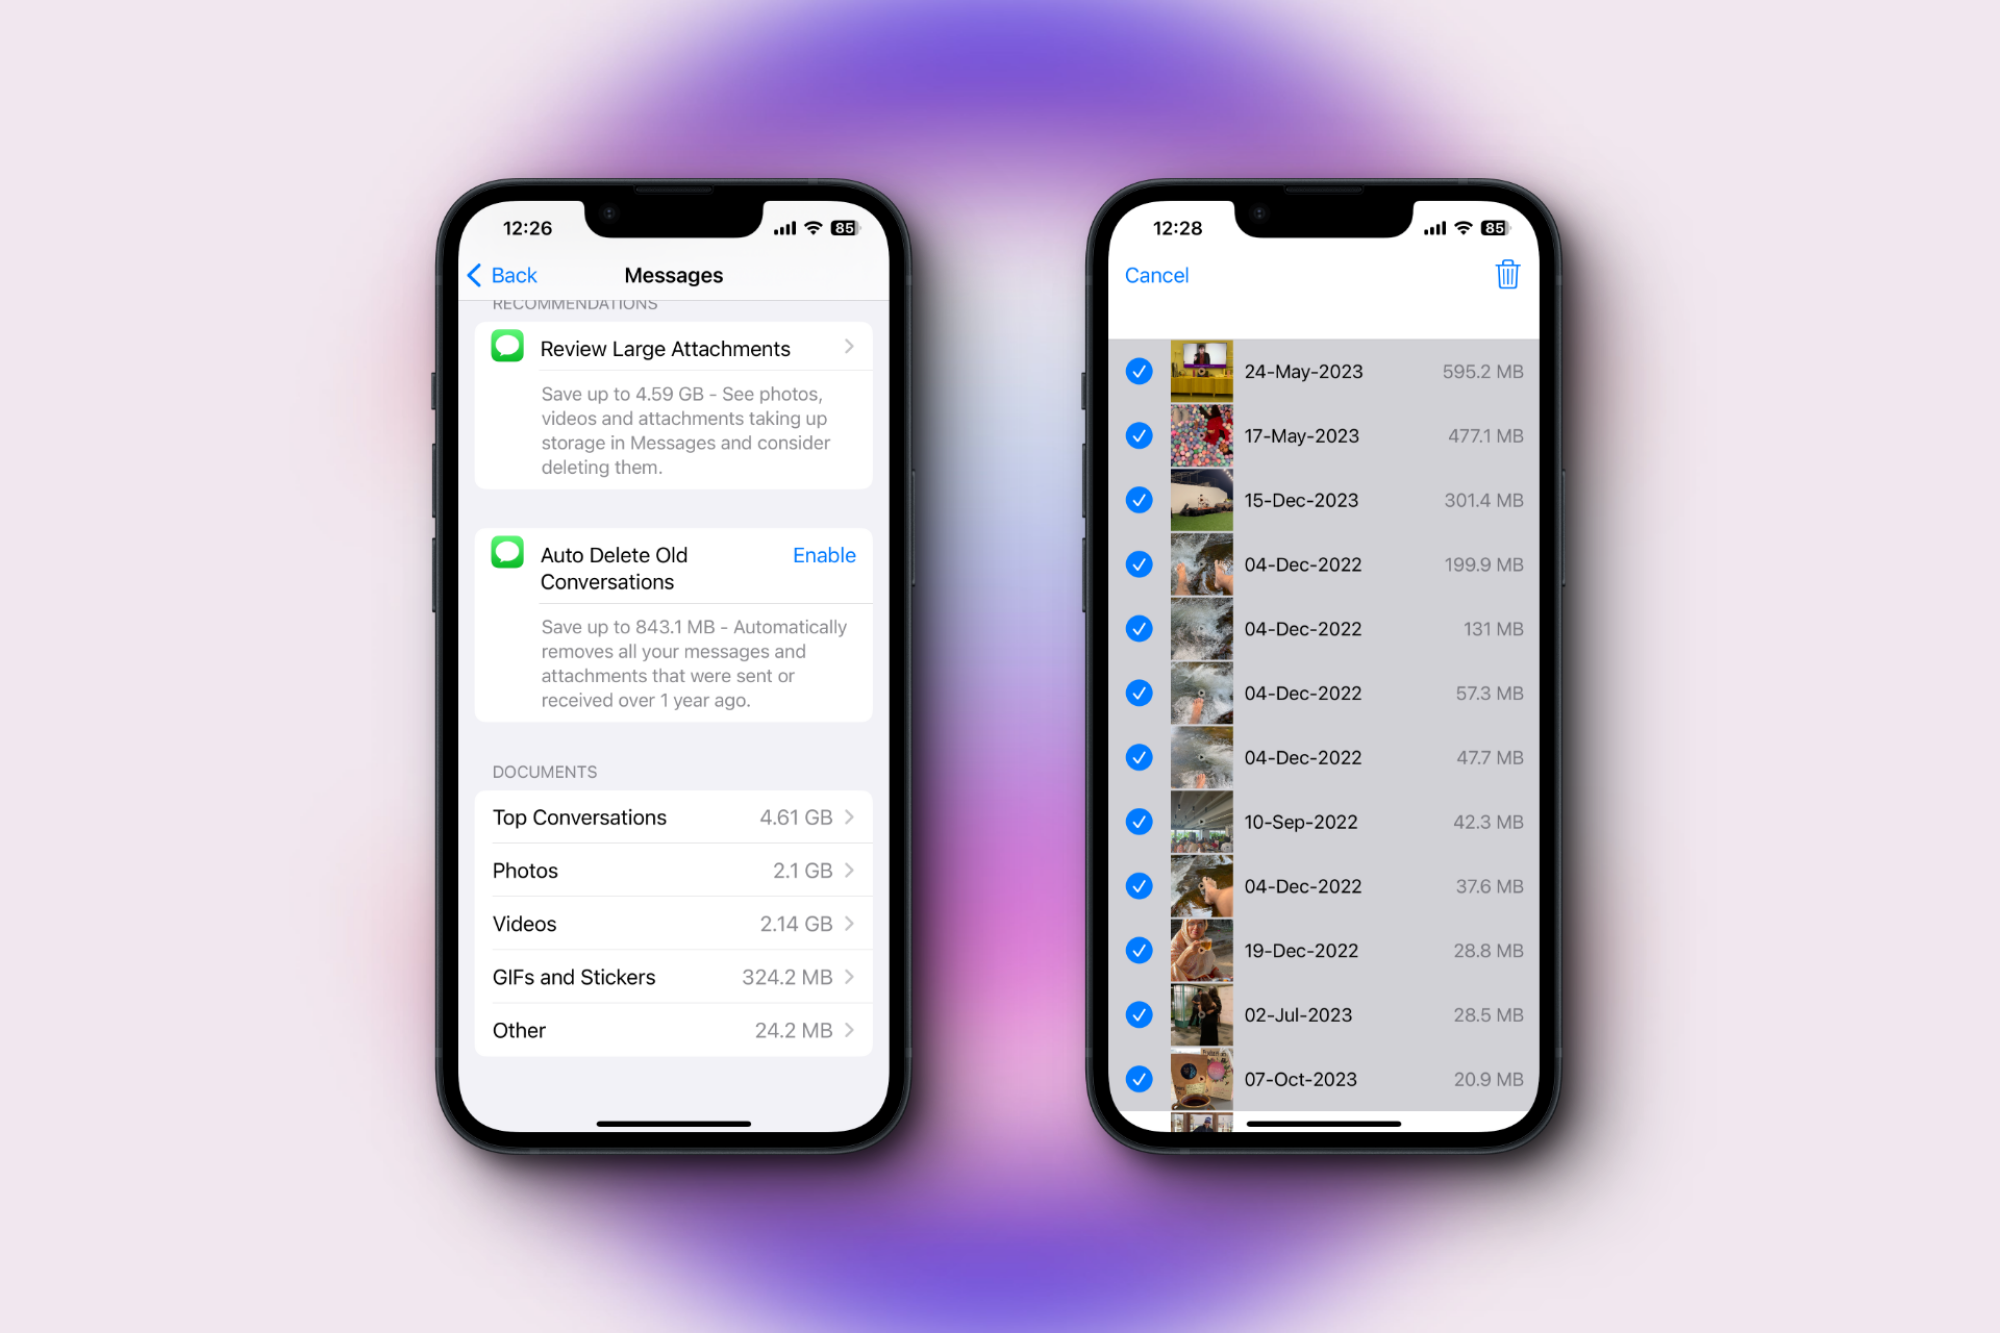 Review and delete large attachments from iMessages